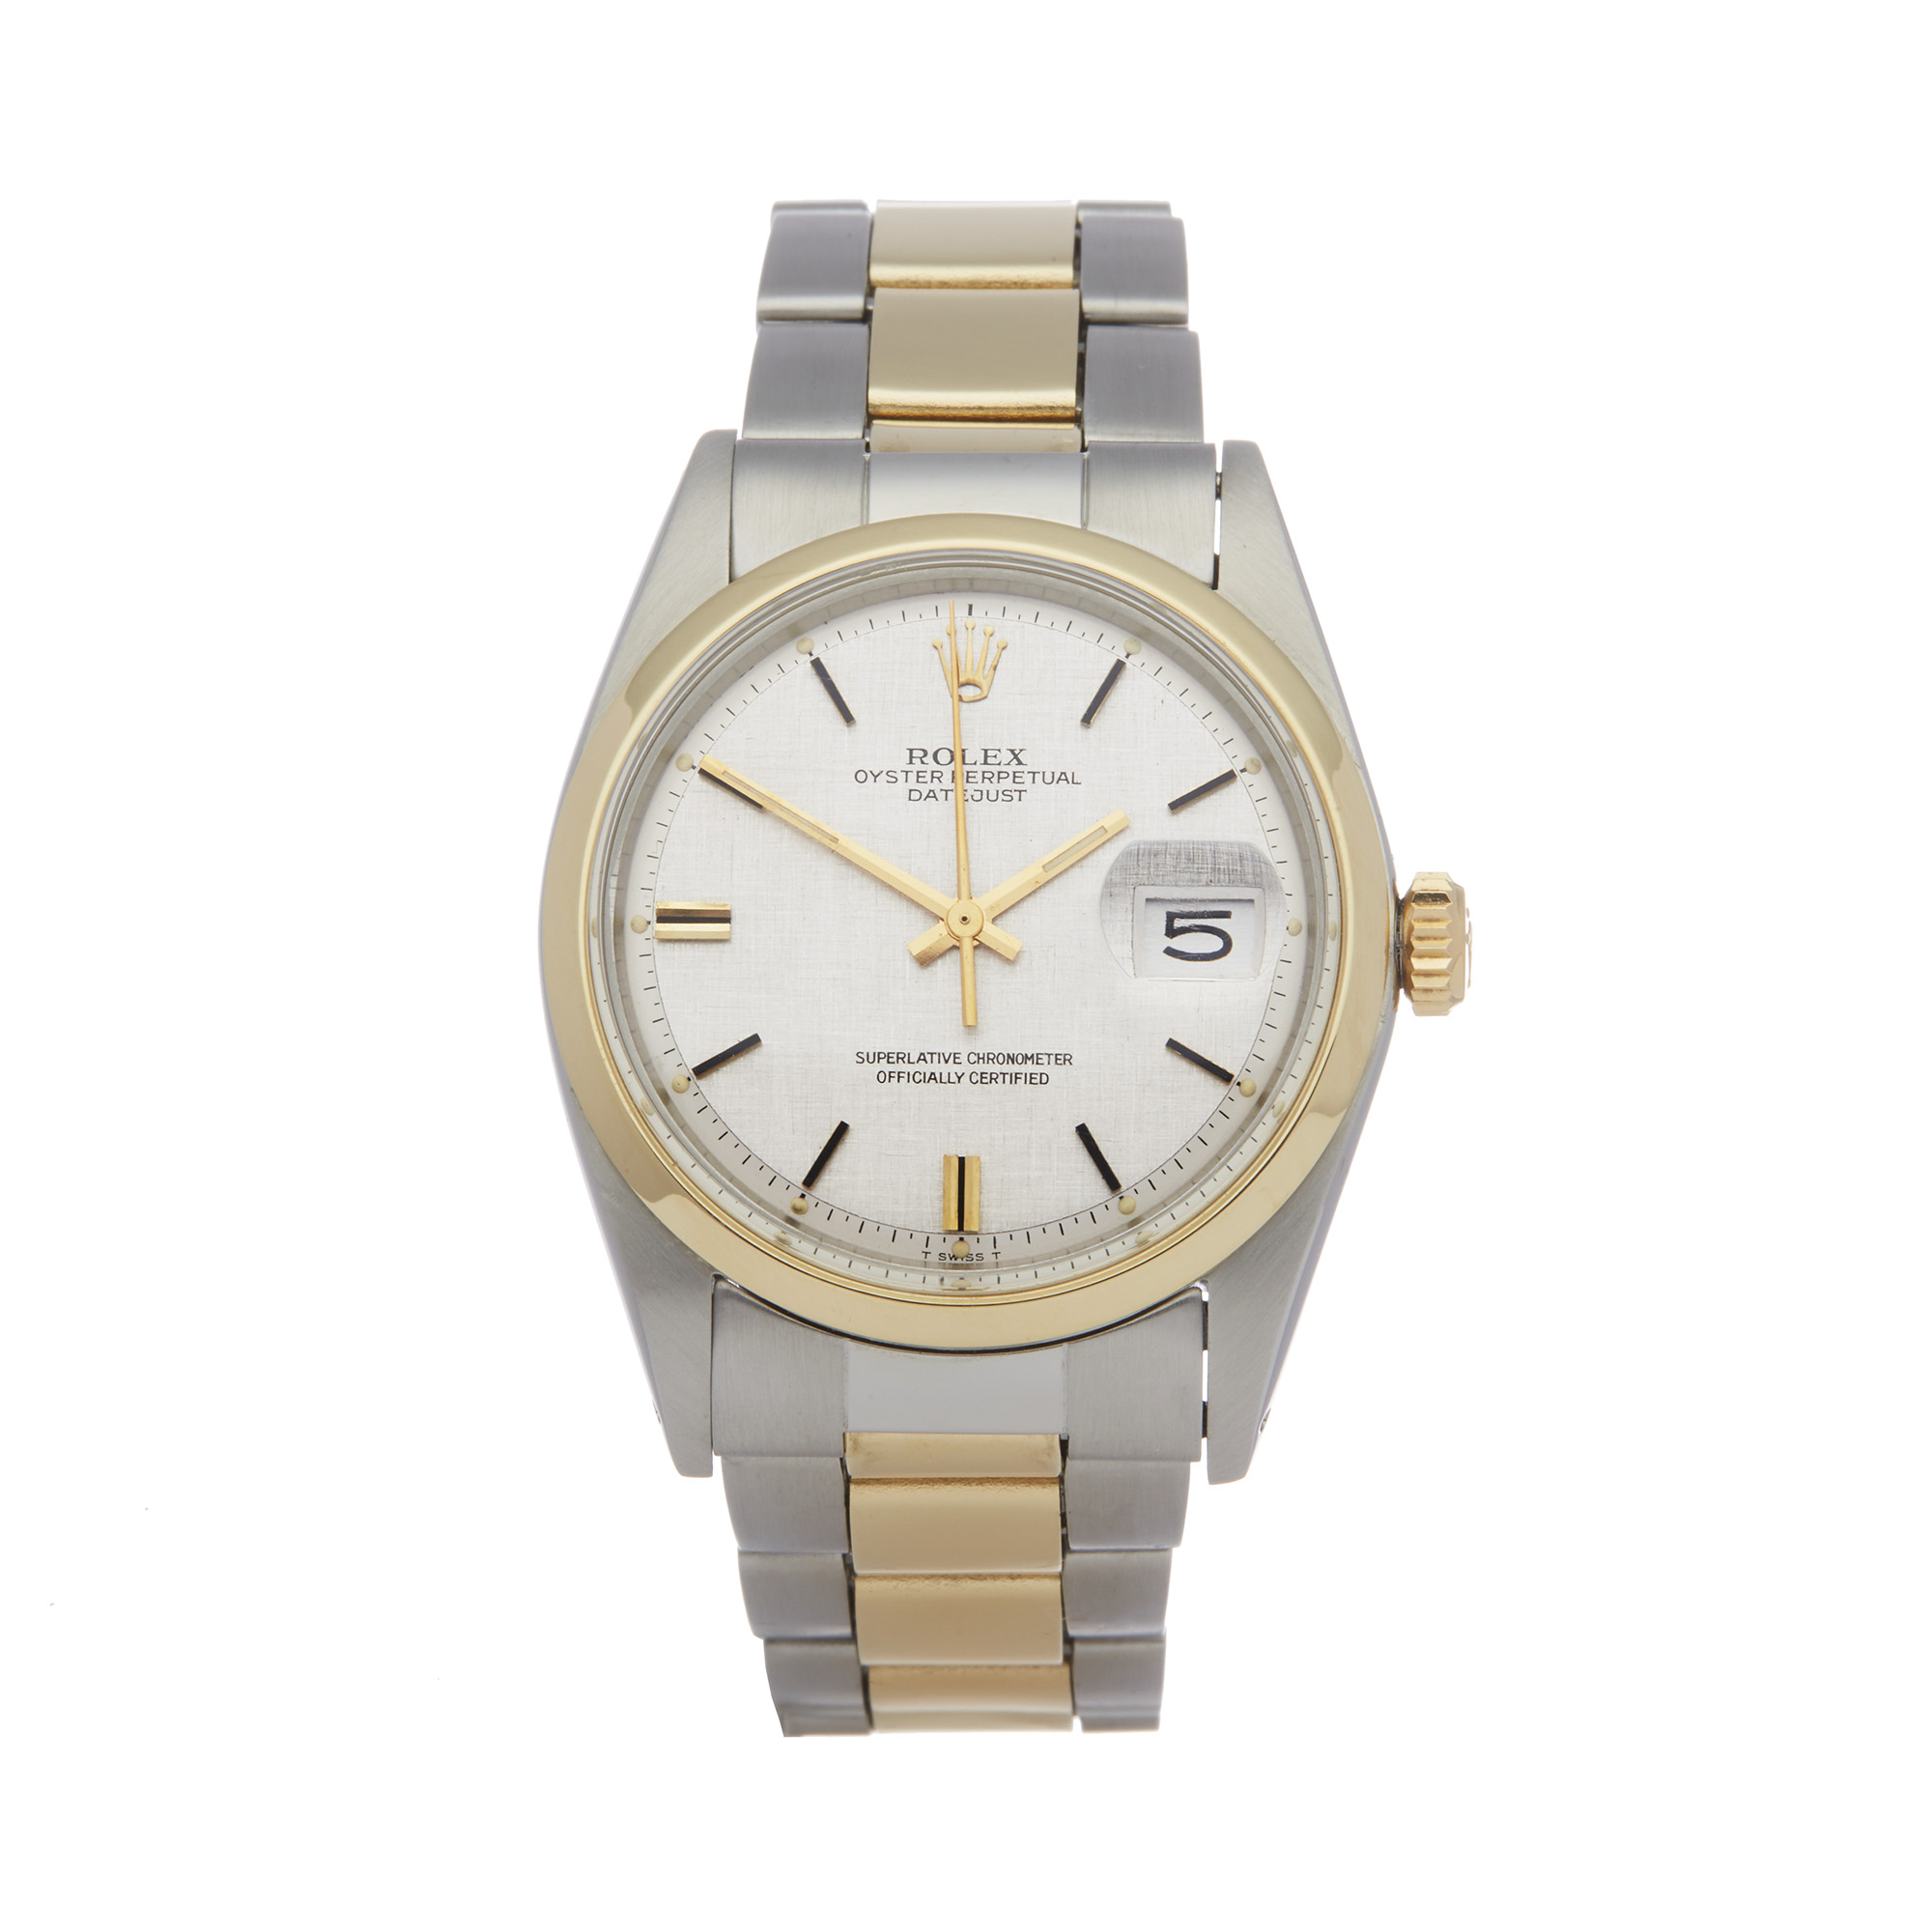 Rolex Datejust 36 1600 Men Stainless Steel & Yellow Gold Watch - Image 8 of 8